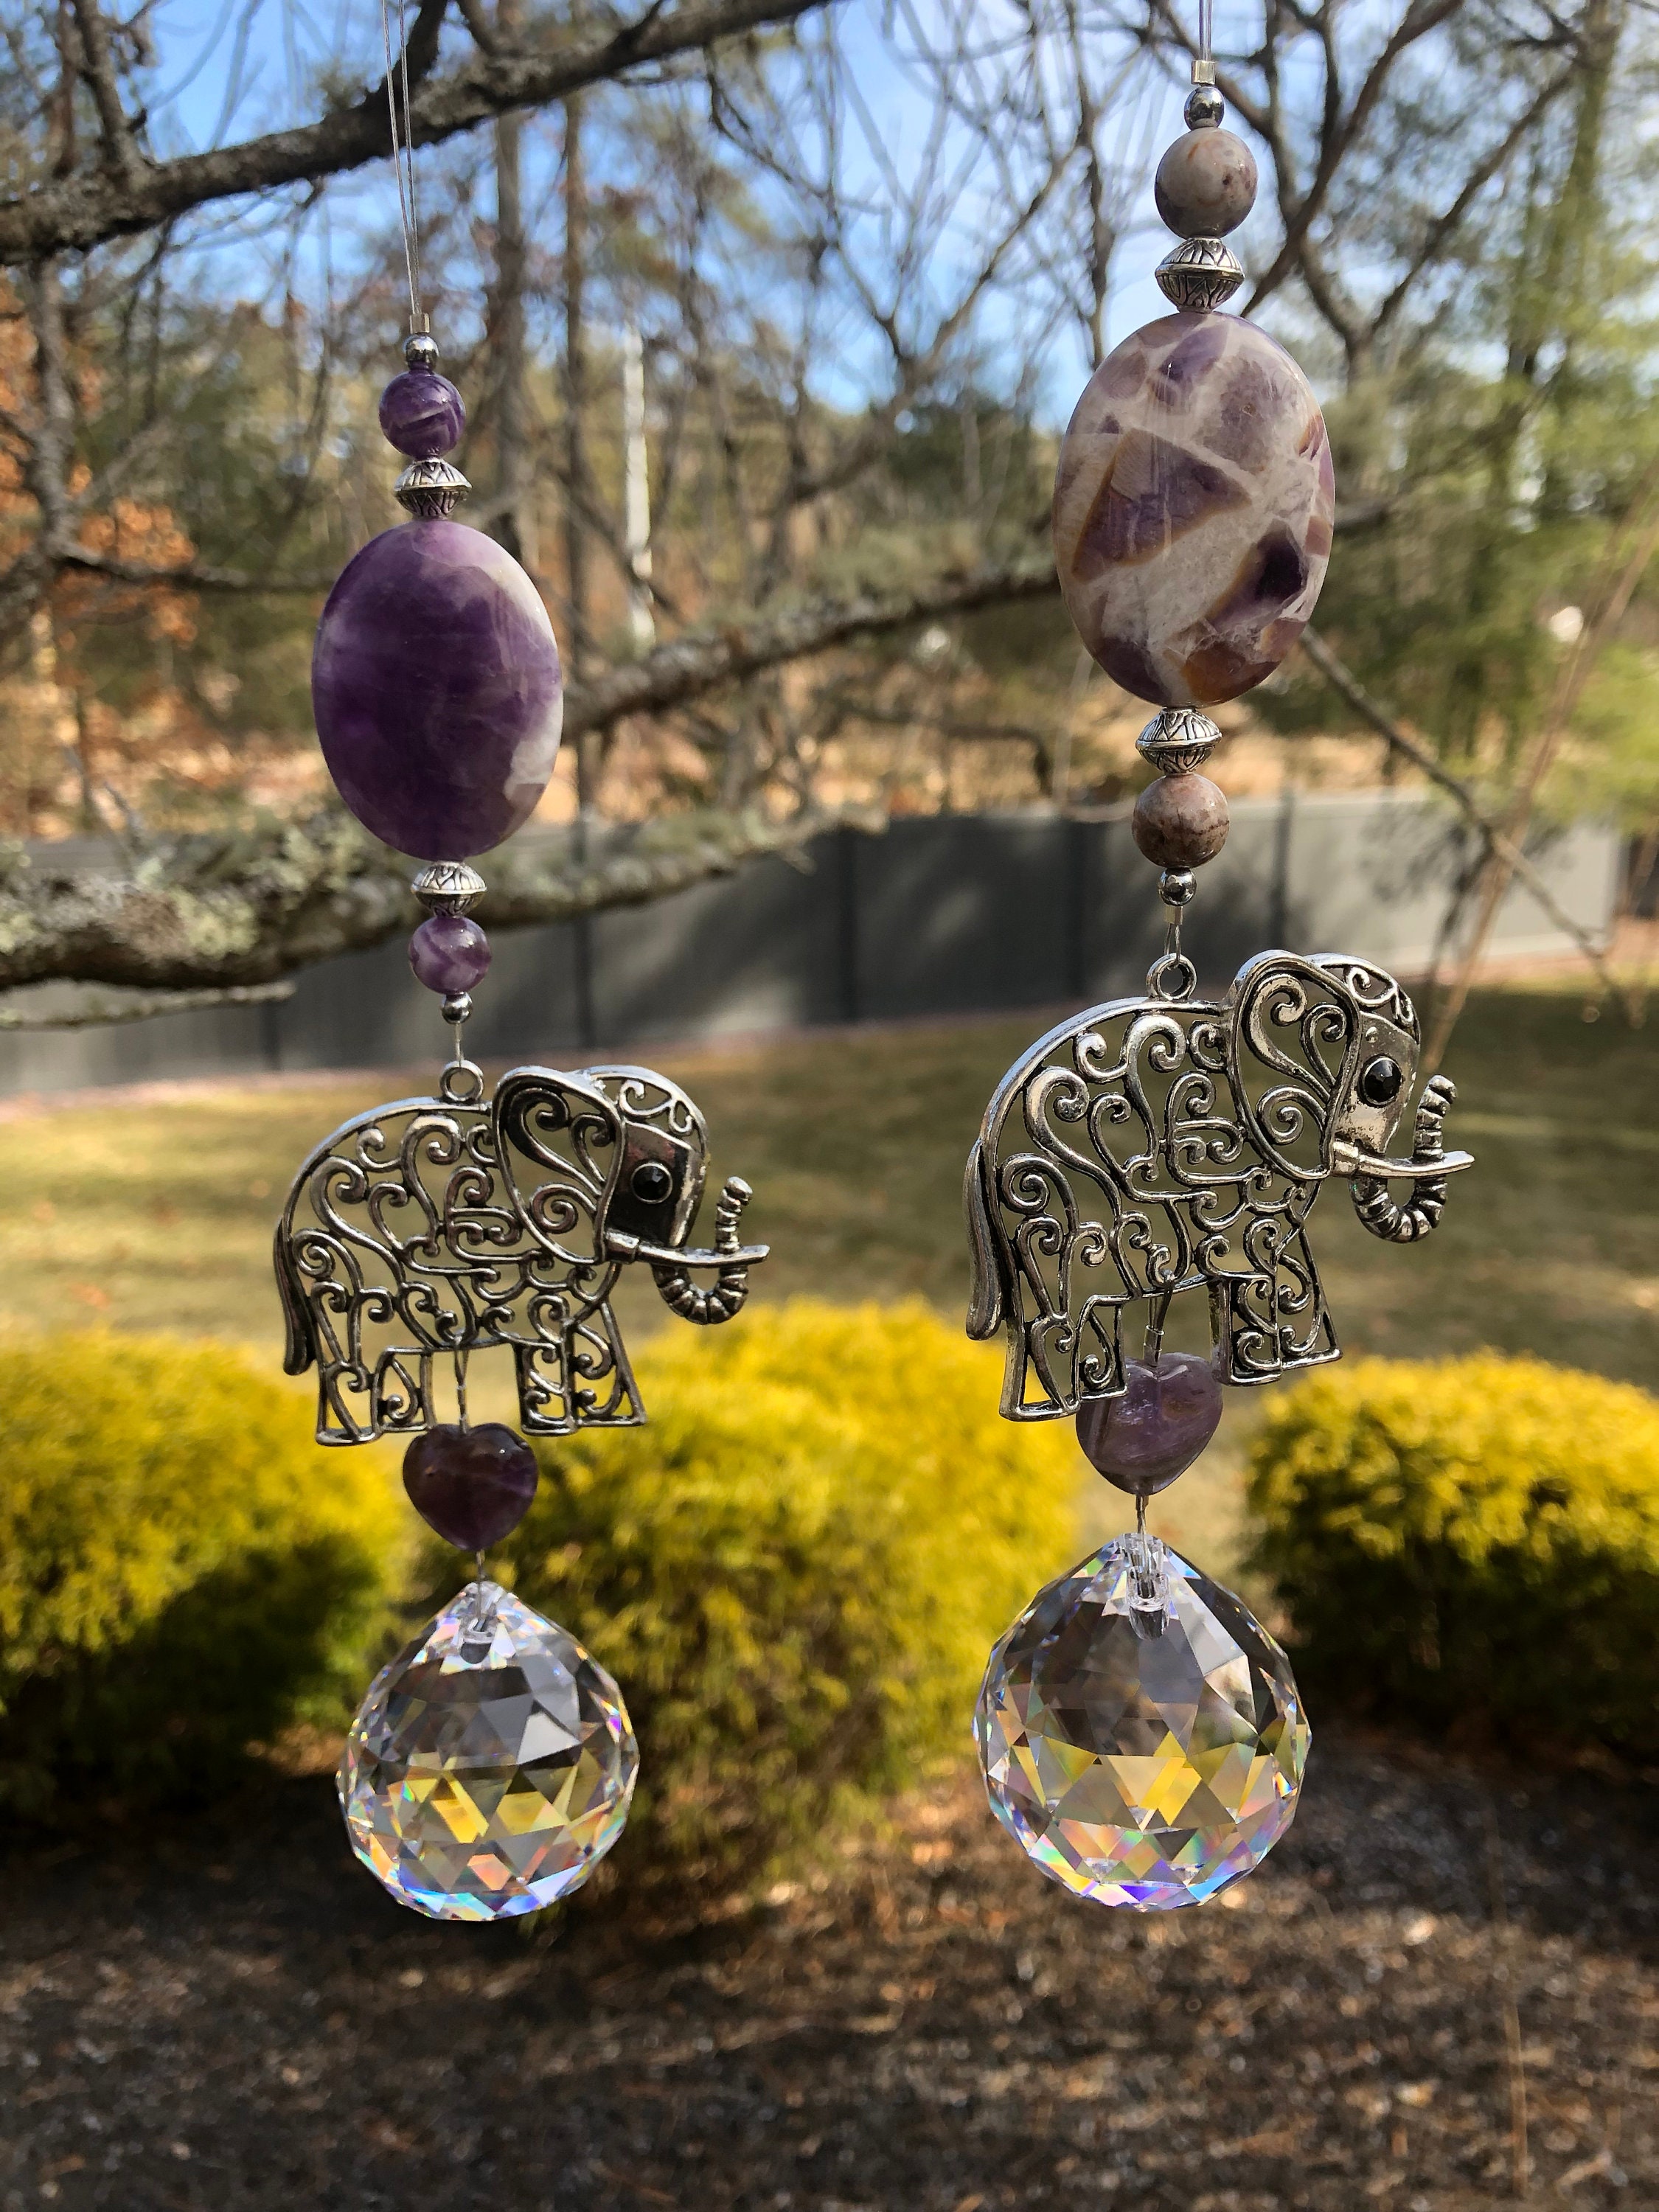 Buy Tree of Life Crystal Suncatcher, Amethyst Natural Stones, Hanging  Crystals, Rainbow Maker for Windows, Hanging Prism, Reiki, Ornament Online  in India 